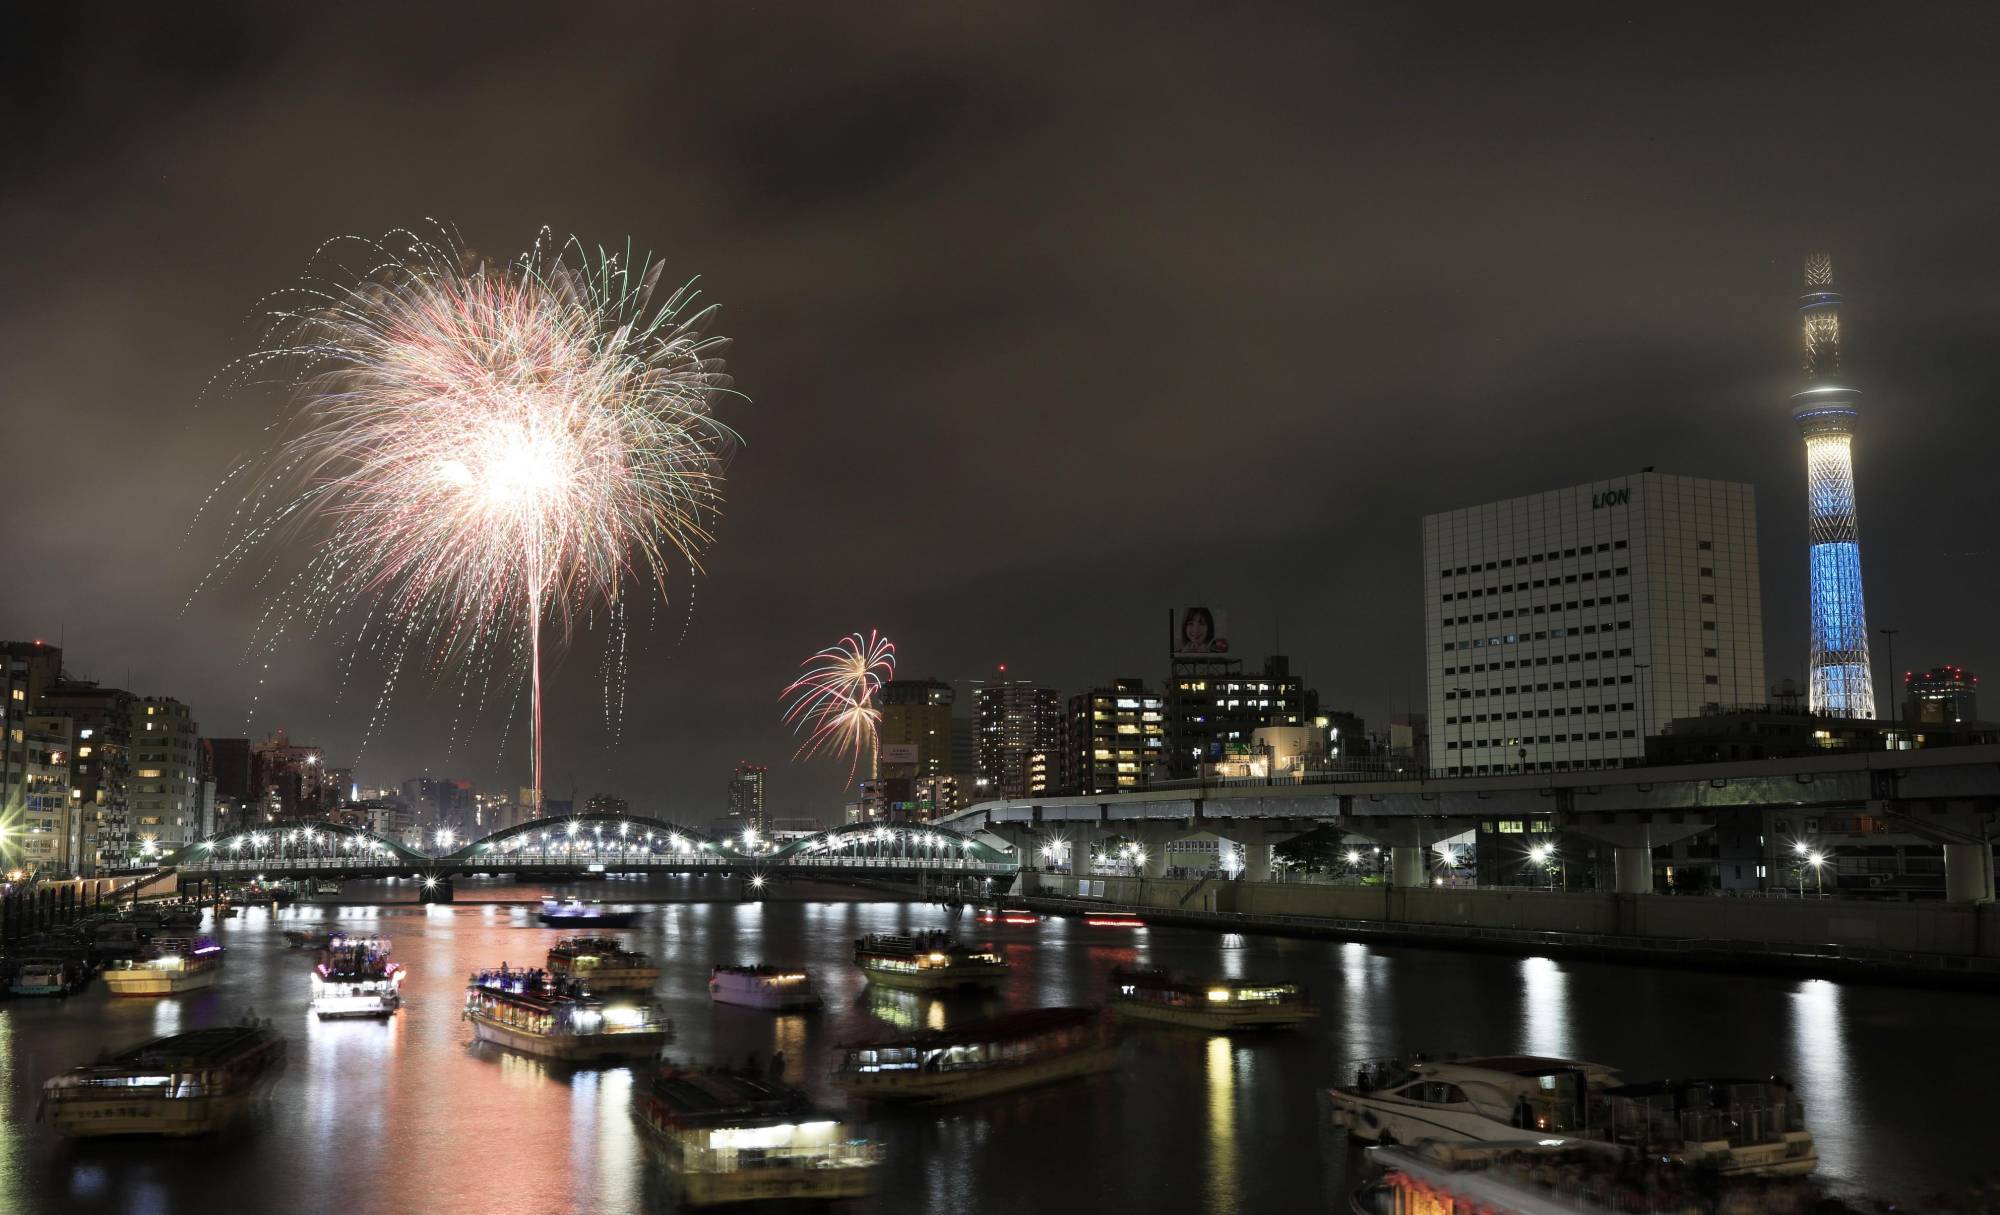 A display of fireworks over the Sumida River in Tokyo in July 2019. The Sumida River Fireworks Festival will be back this summer after a four-year hiatus due to the COVID-19 pandemic. | KYODO